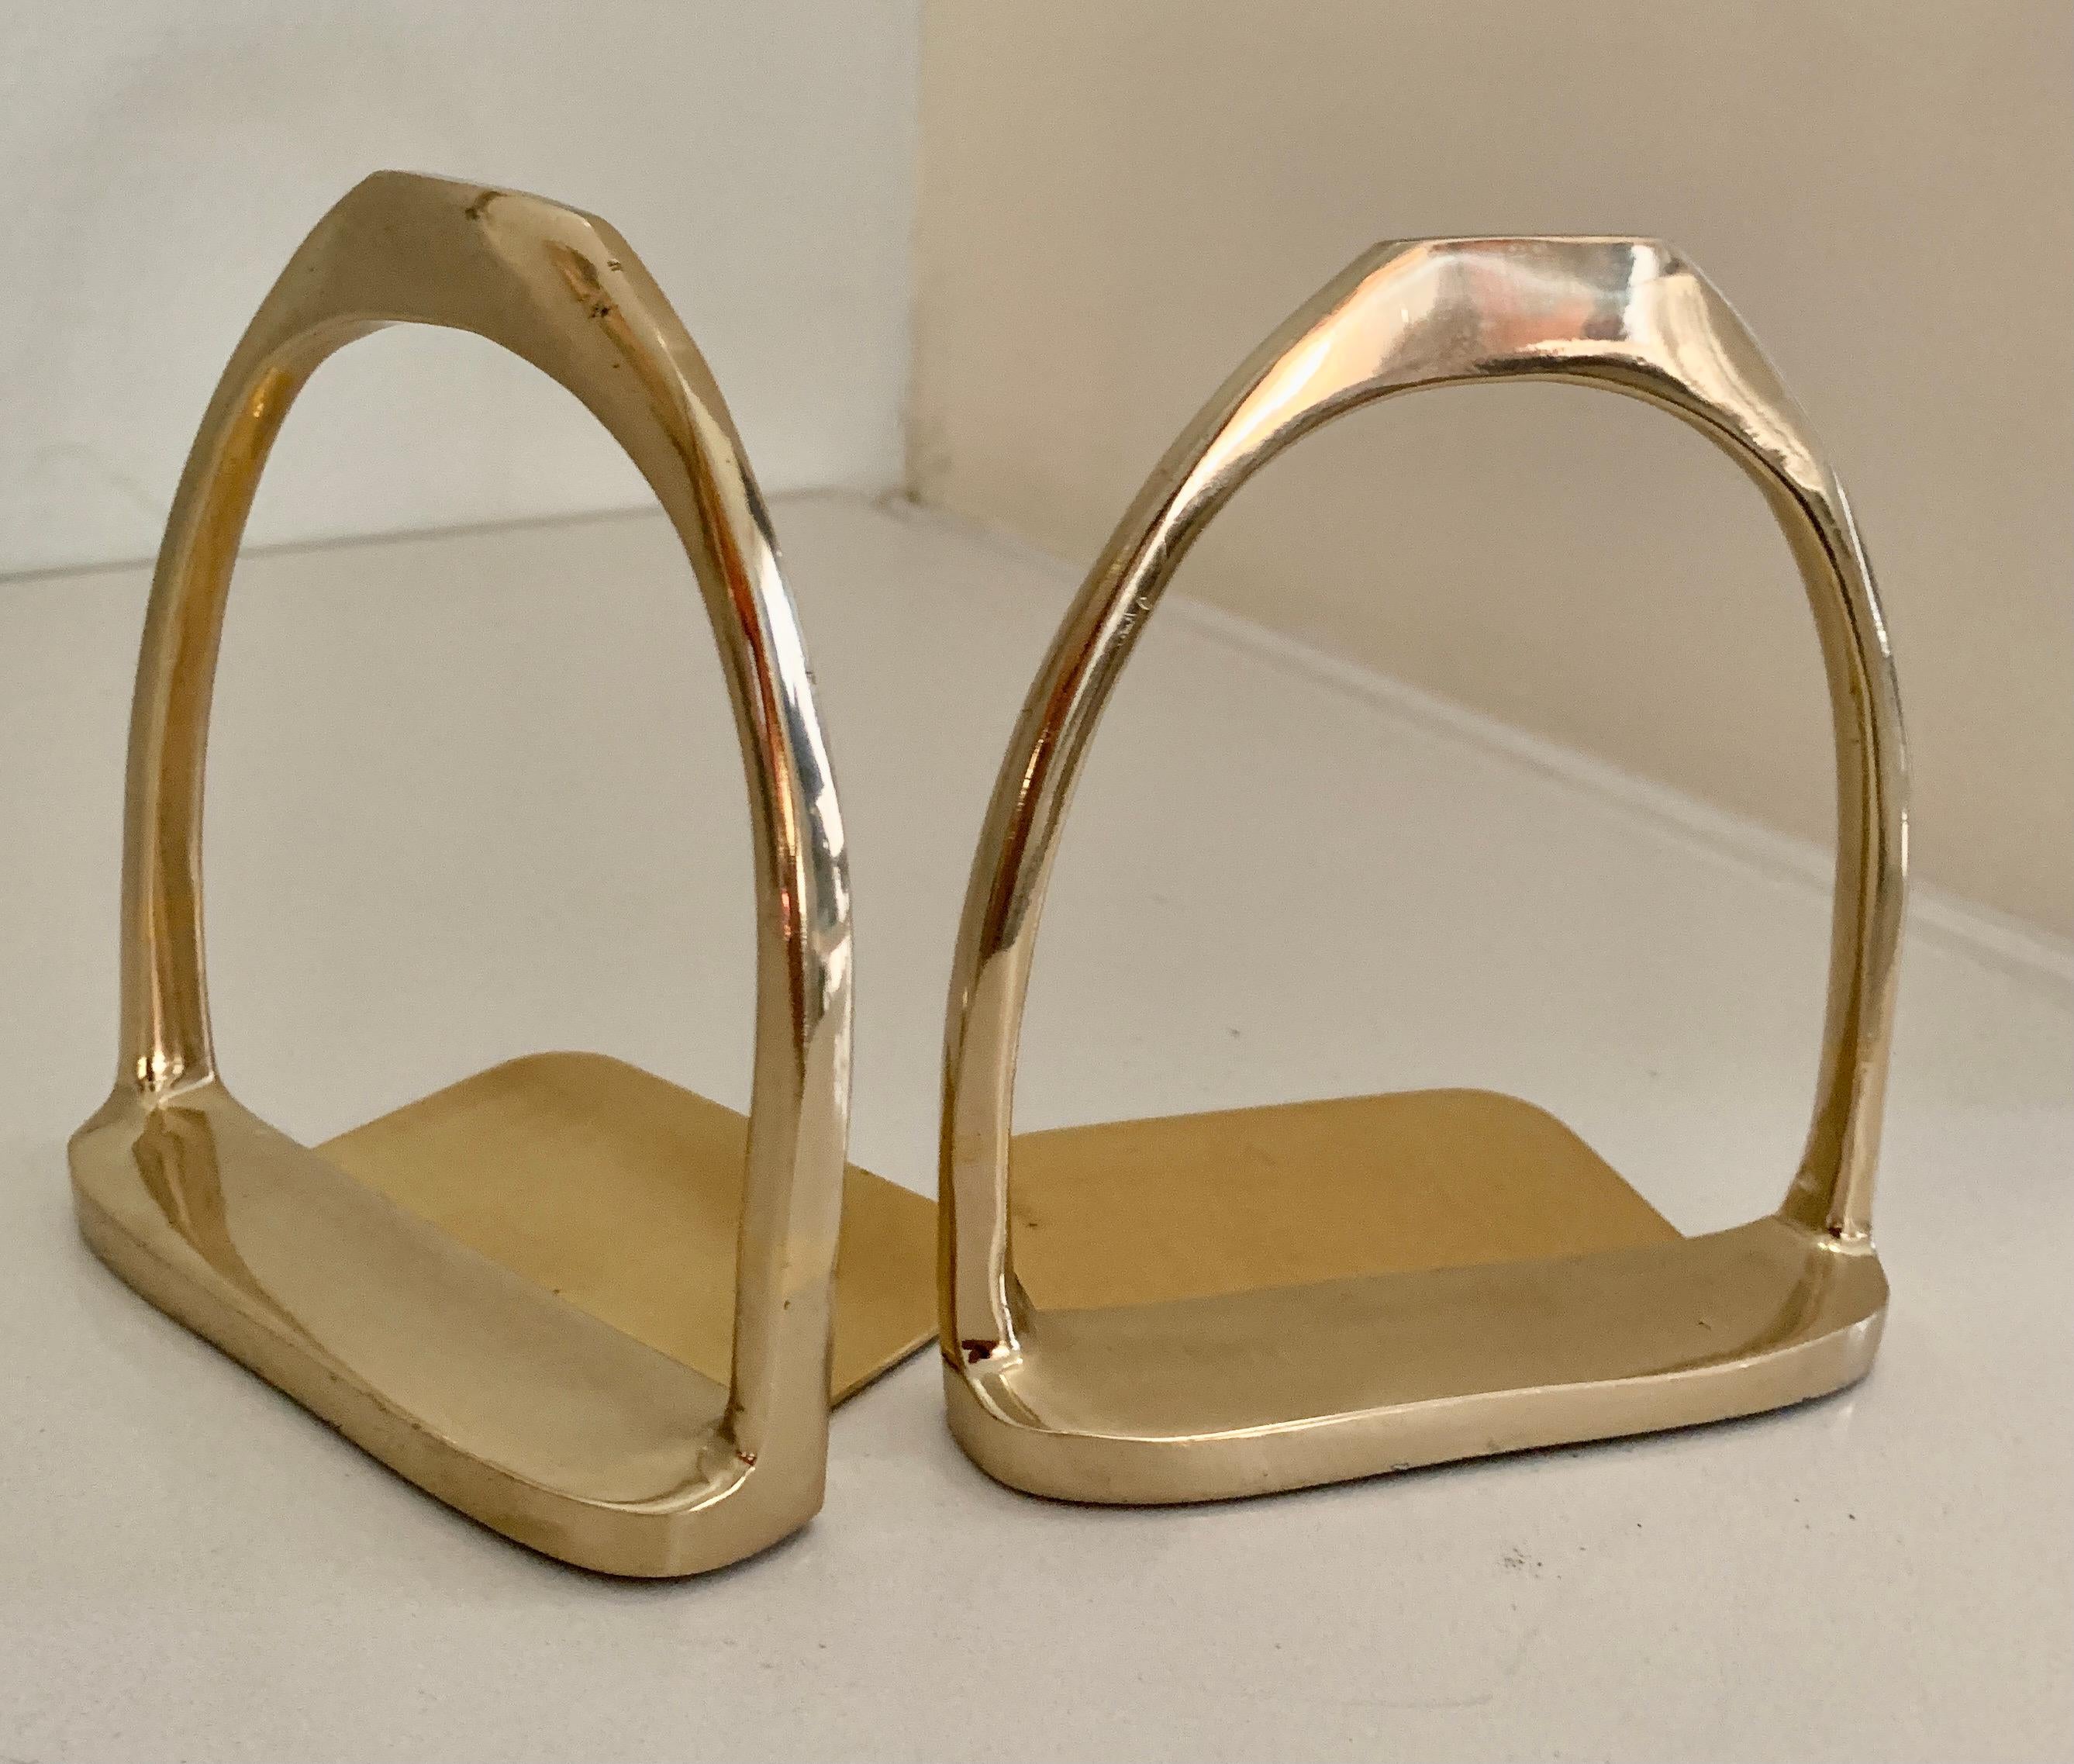 A wonderful Pair of Polished Brass Bookends in the Style of Gucci. A compliment to many interiors and especially those with an Equestrian book collection or Ralph Lauren Style Home... the pair have an extension on the underside to insure books don't